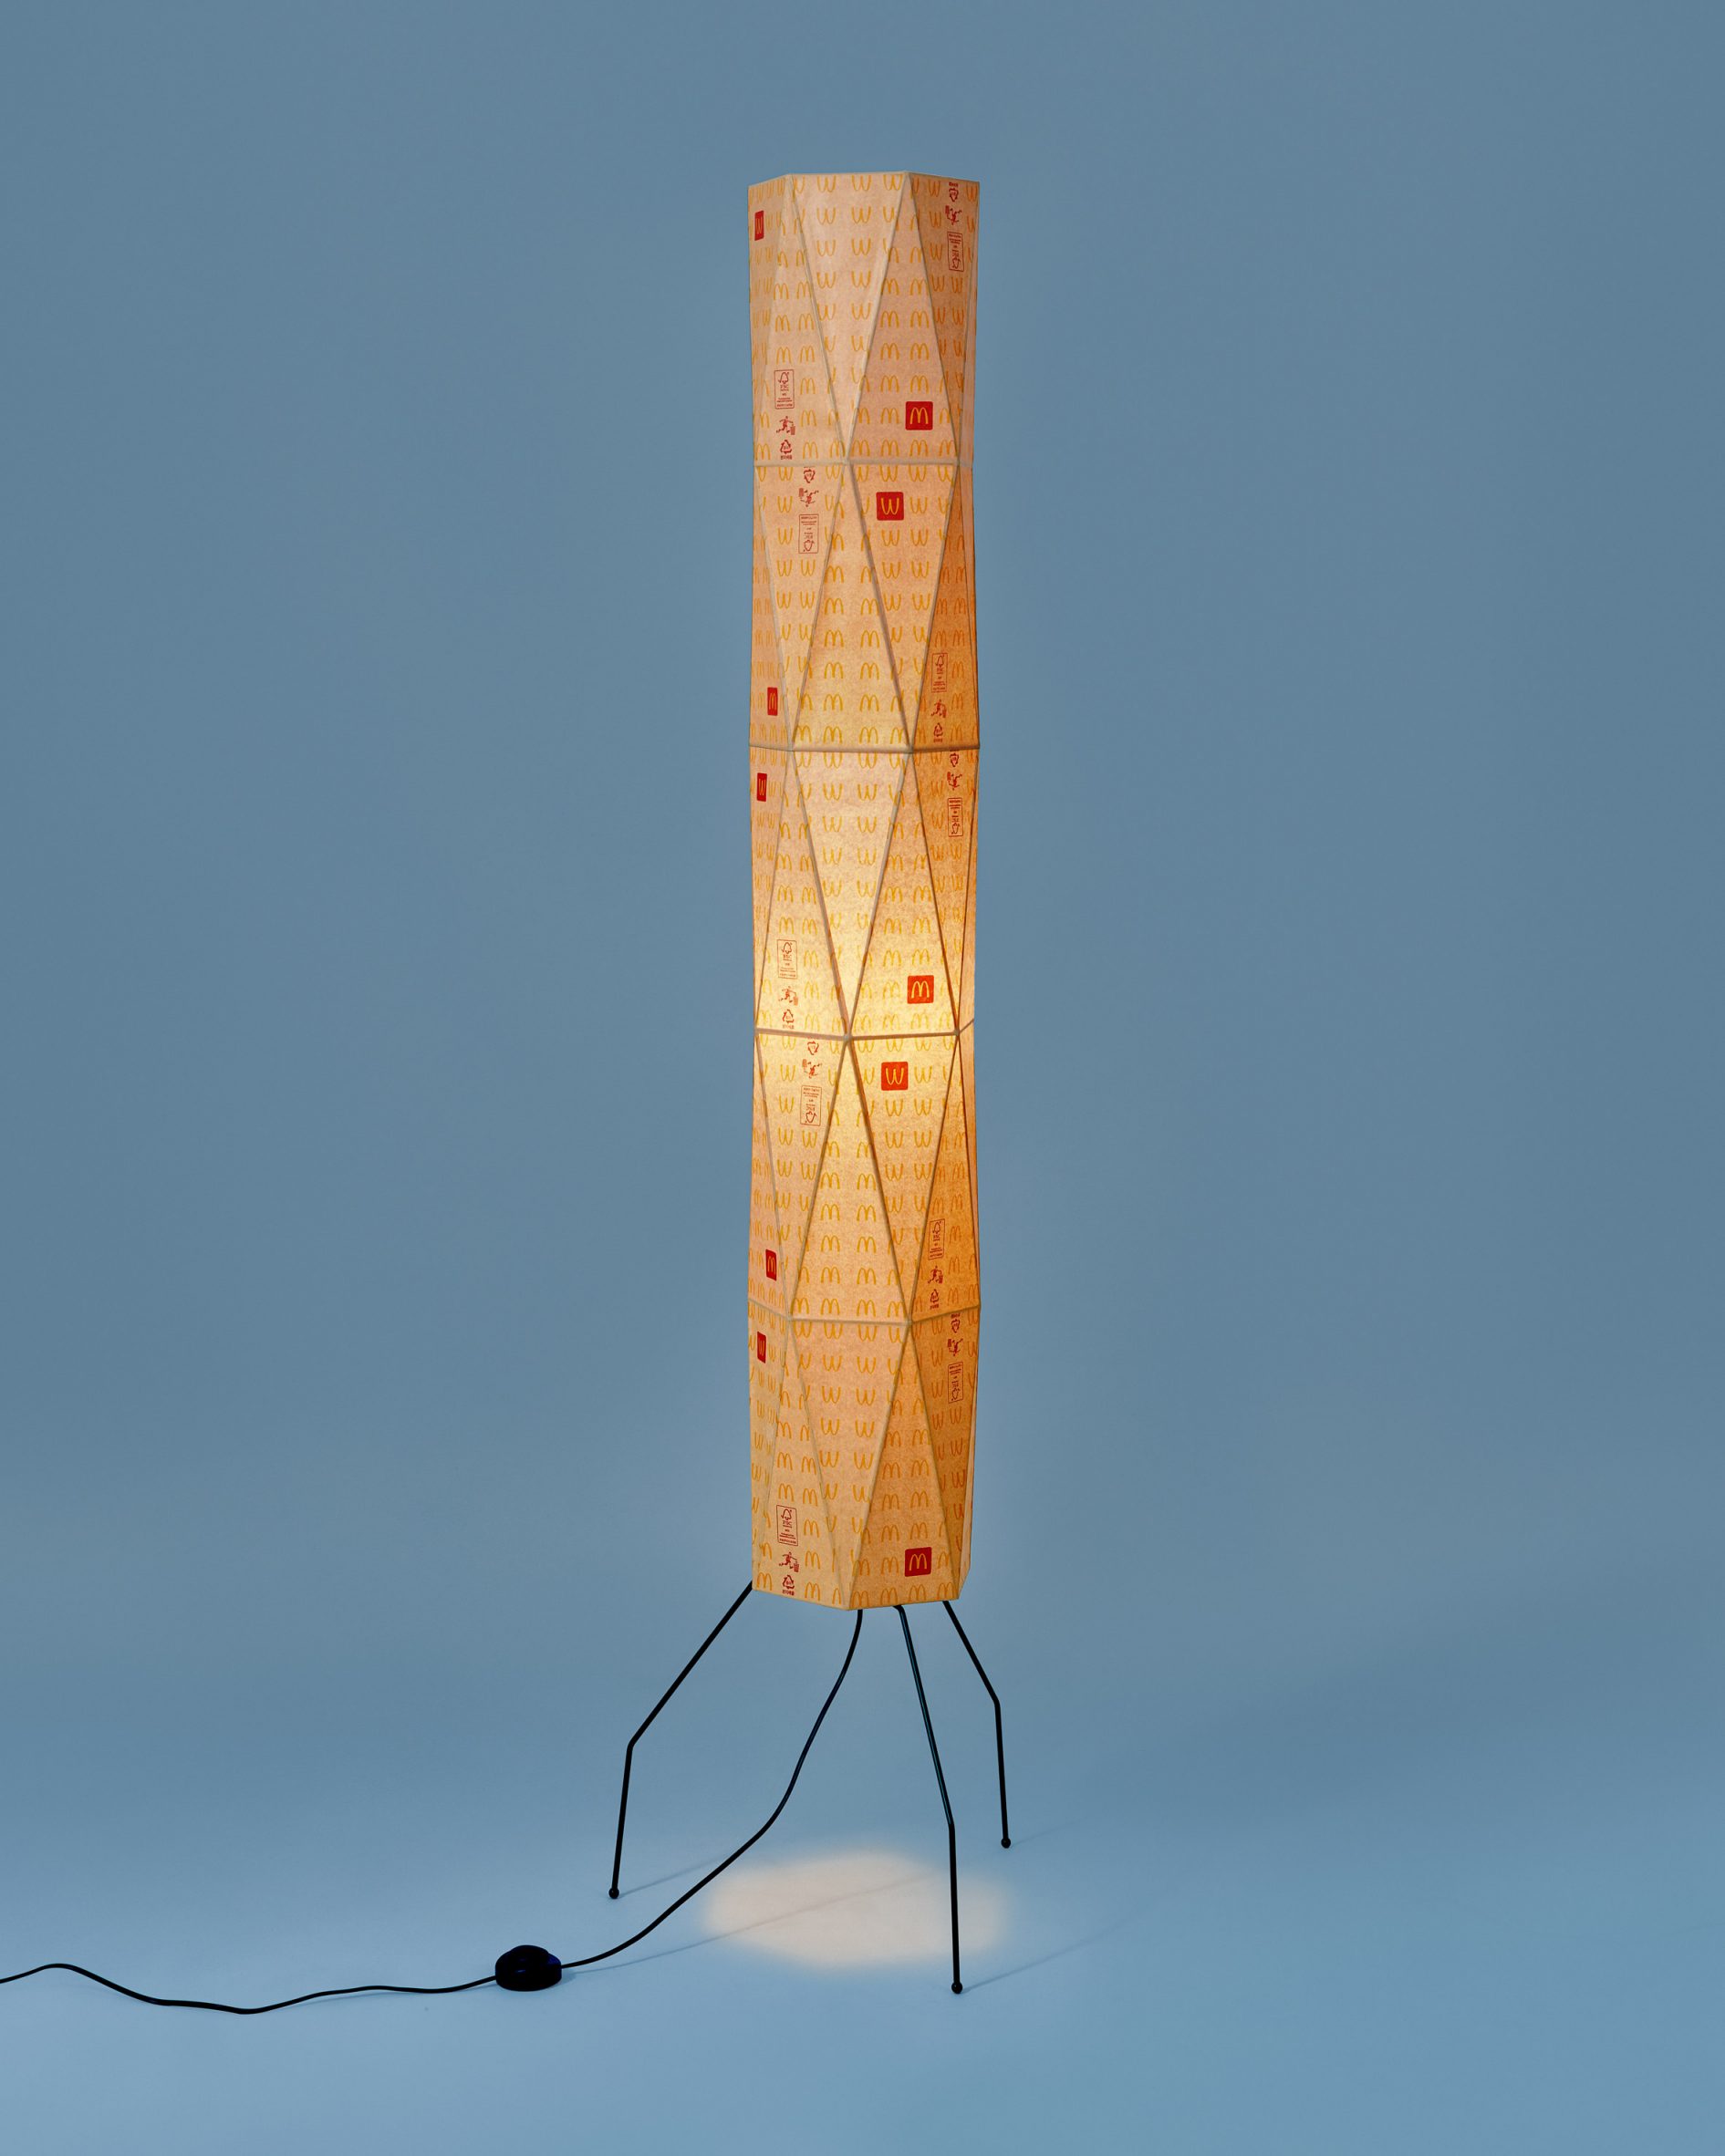 a lamp made with mcdonalds wrappers